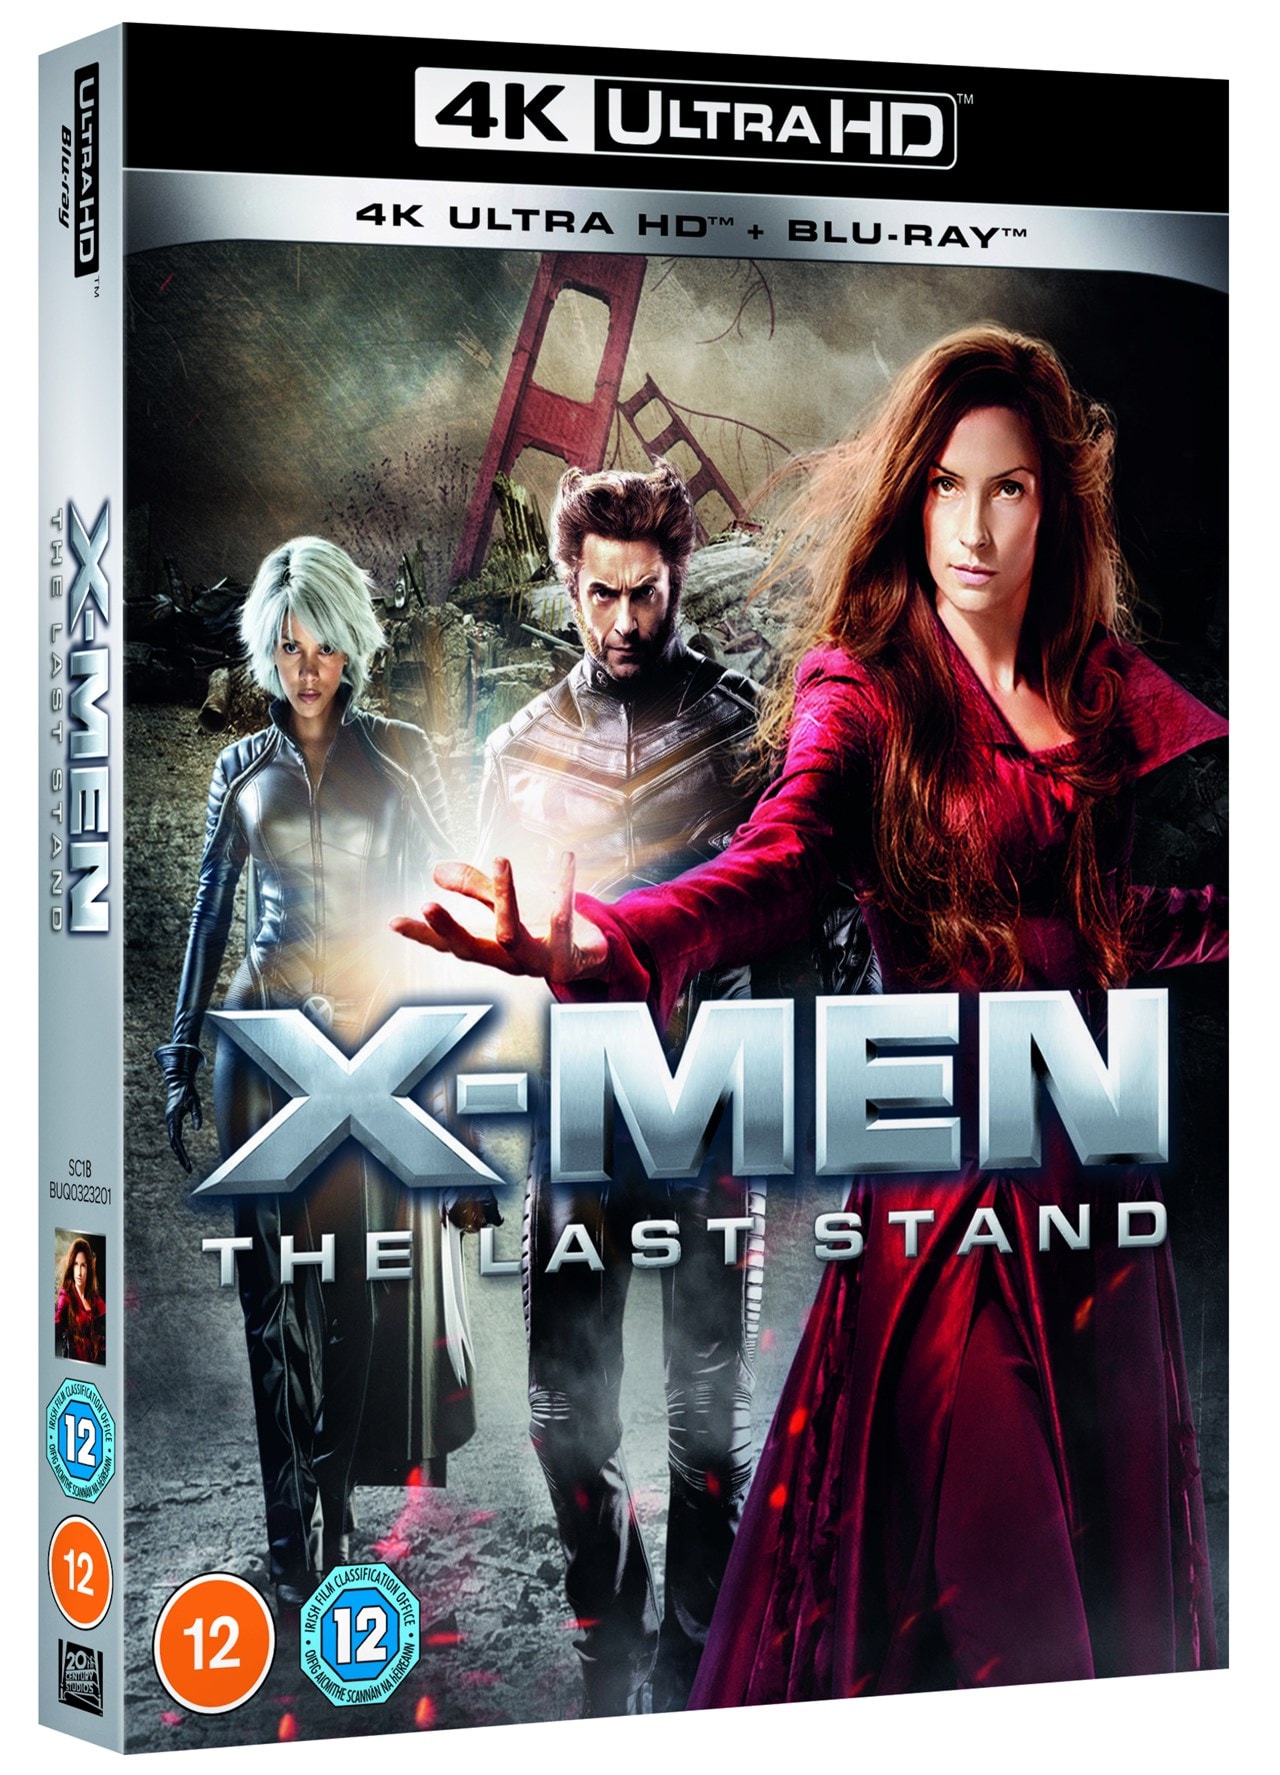 X Men 3 The Last Stand 4k Ultra Hd Blu Ray Free Shipping Over Hmv Store